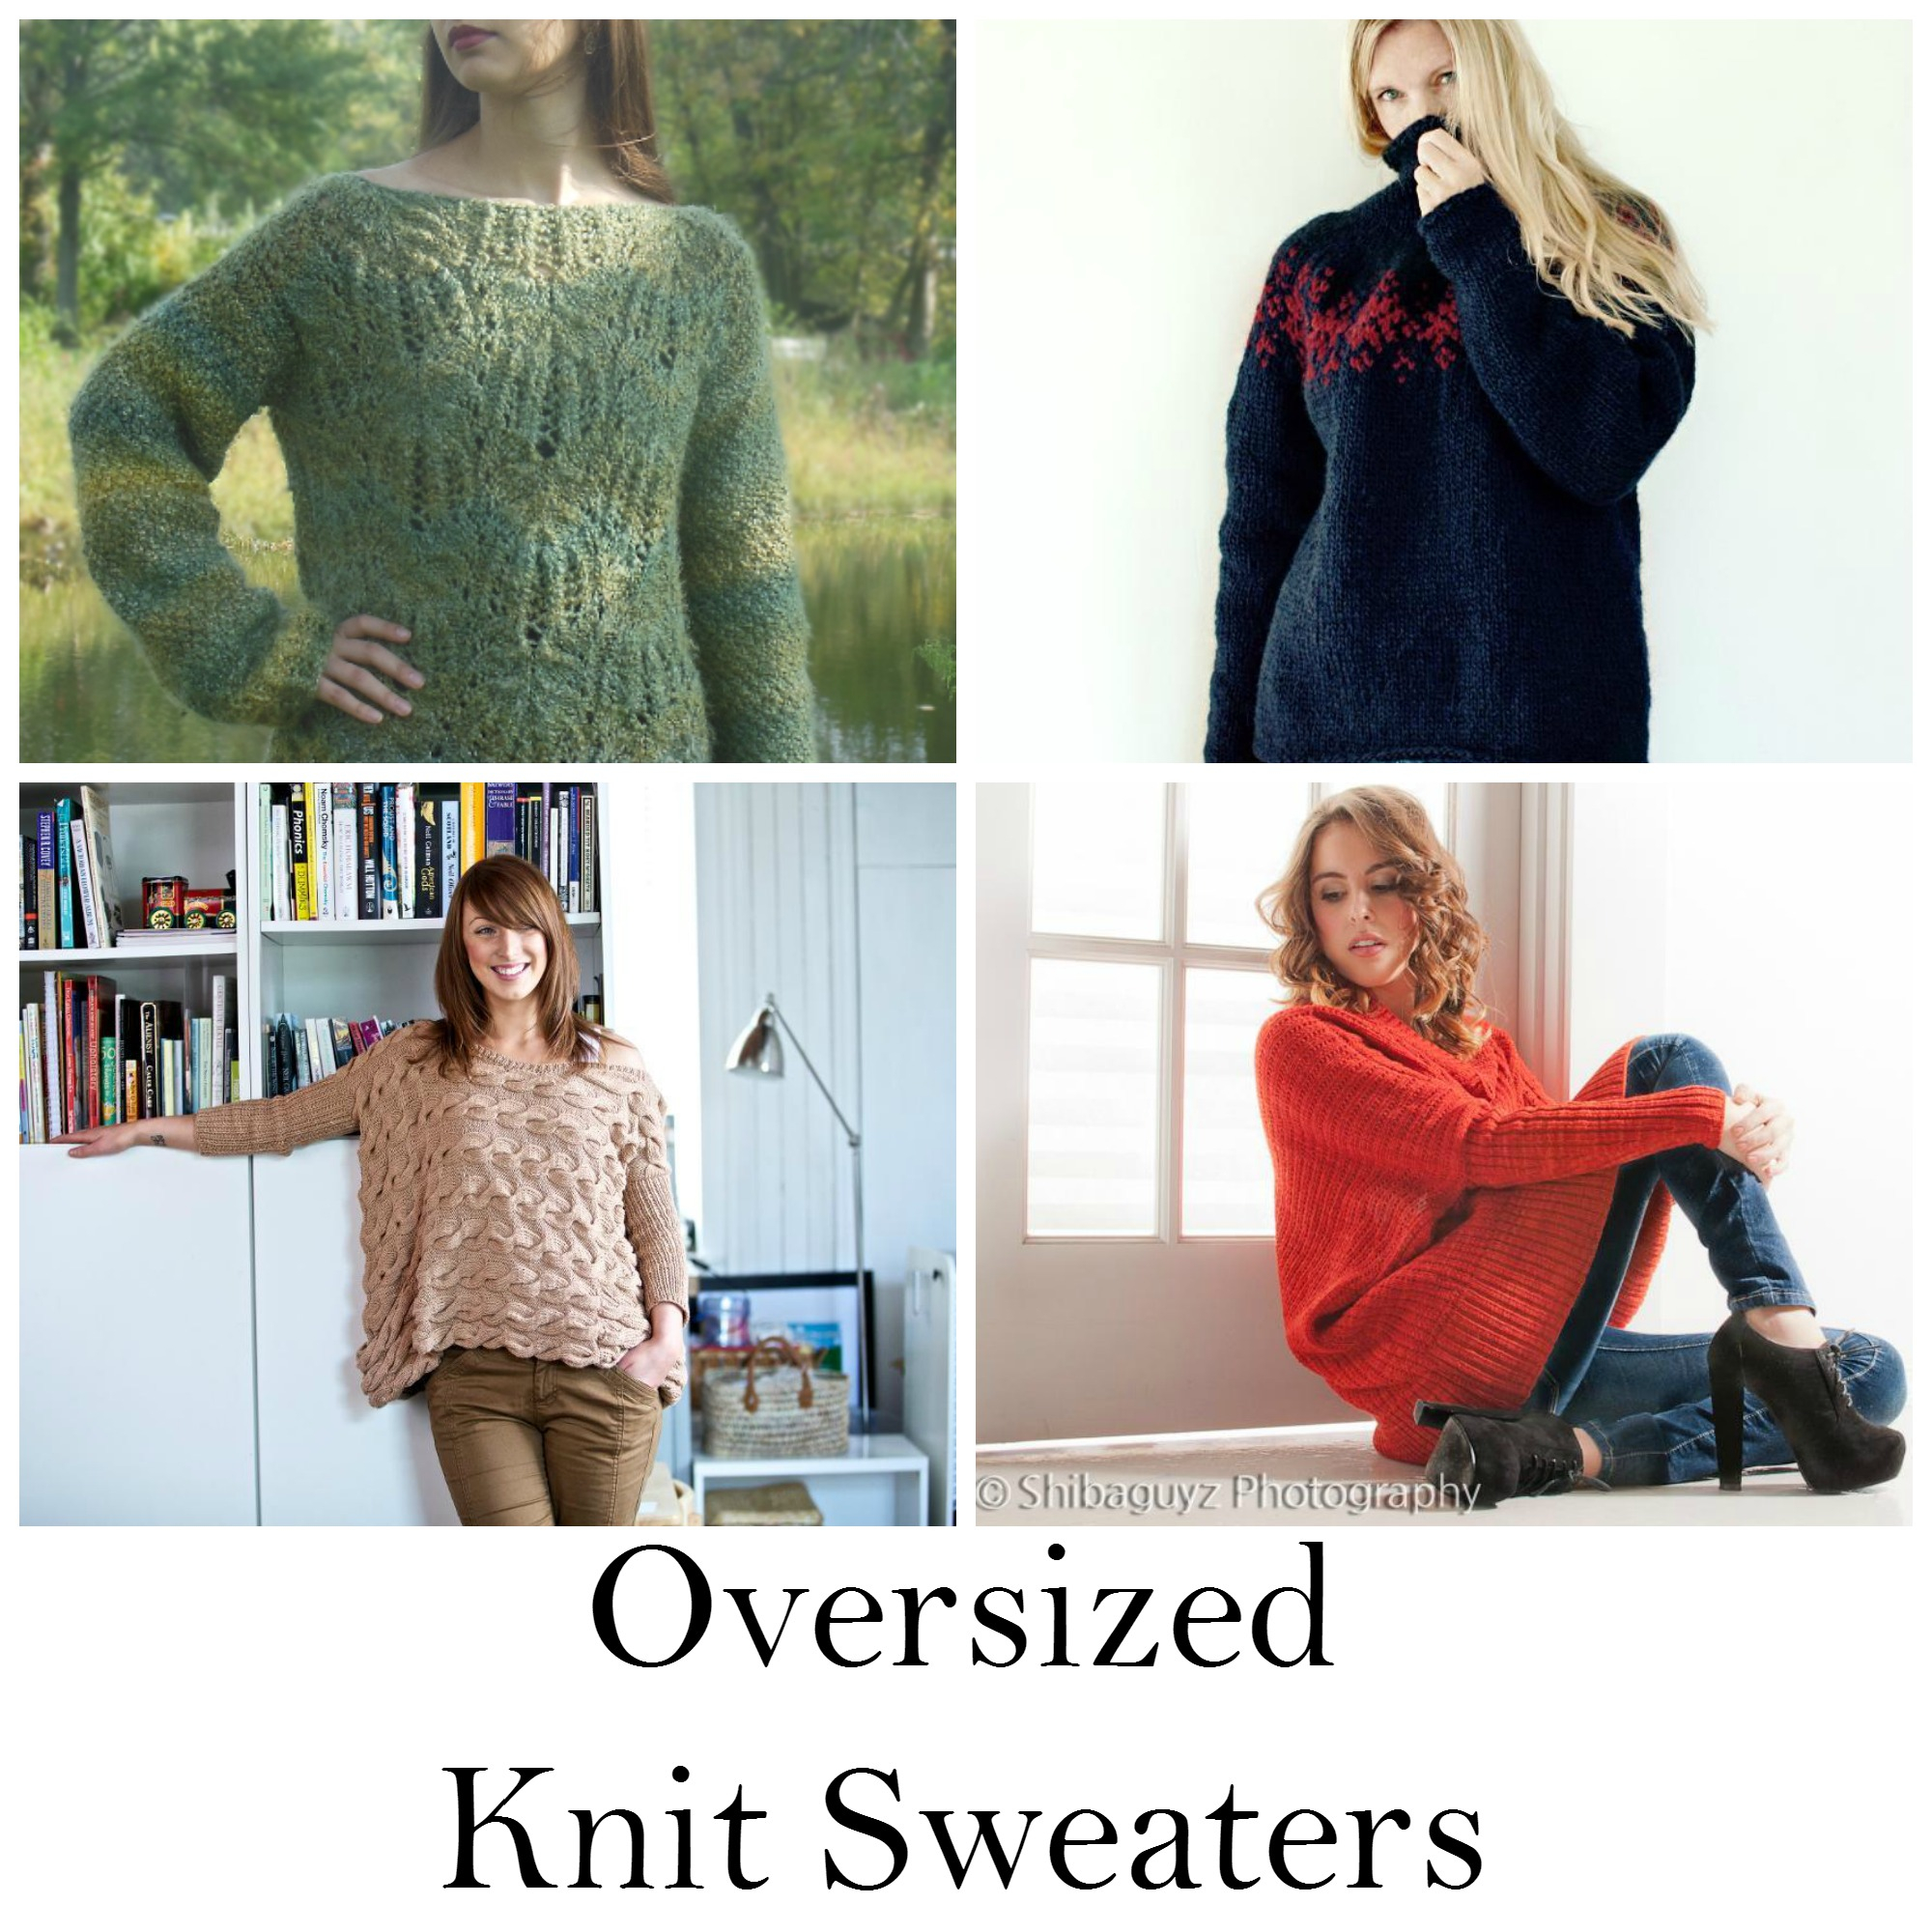 Free Sweater Patterns To Knit 9 Patterns For Oversized Knit Sweaters On Craftsy